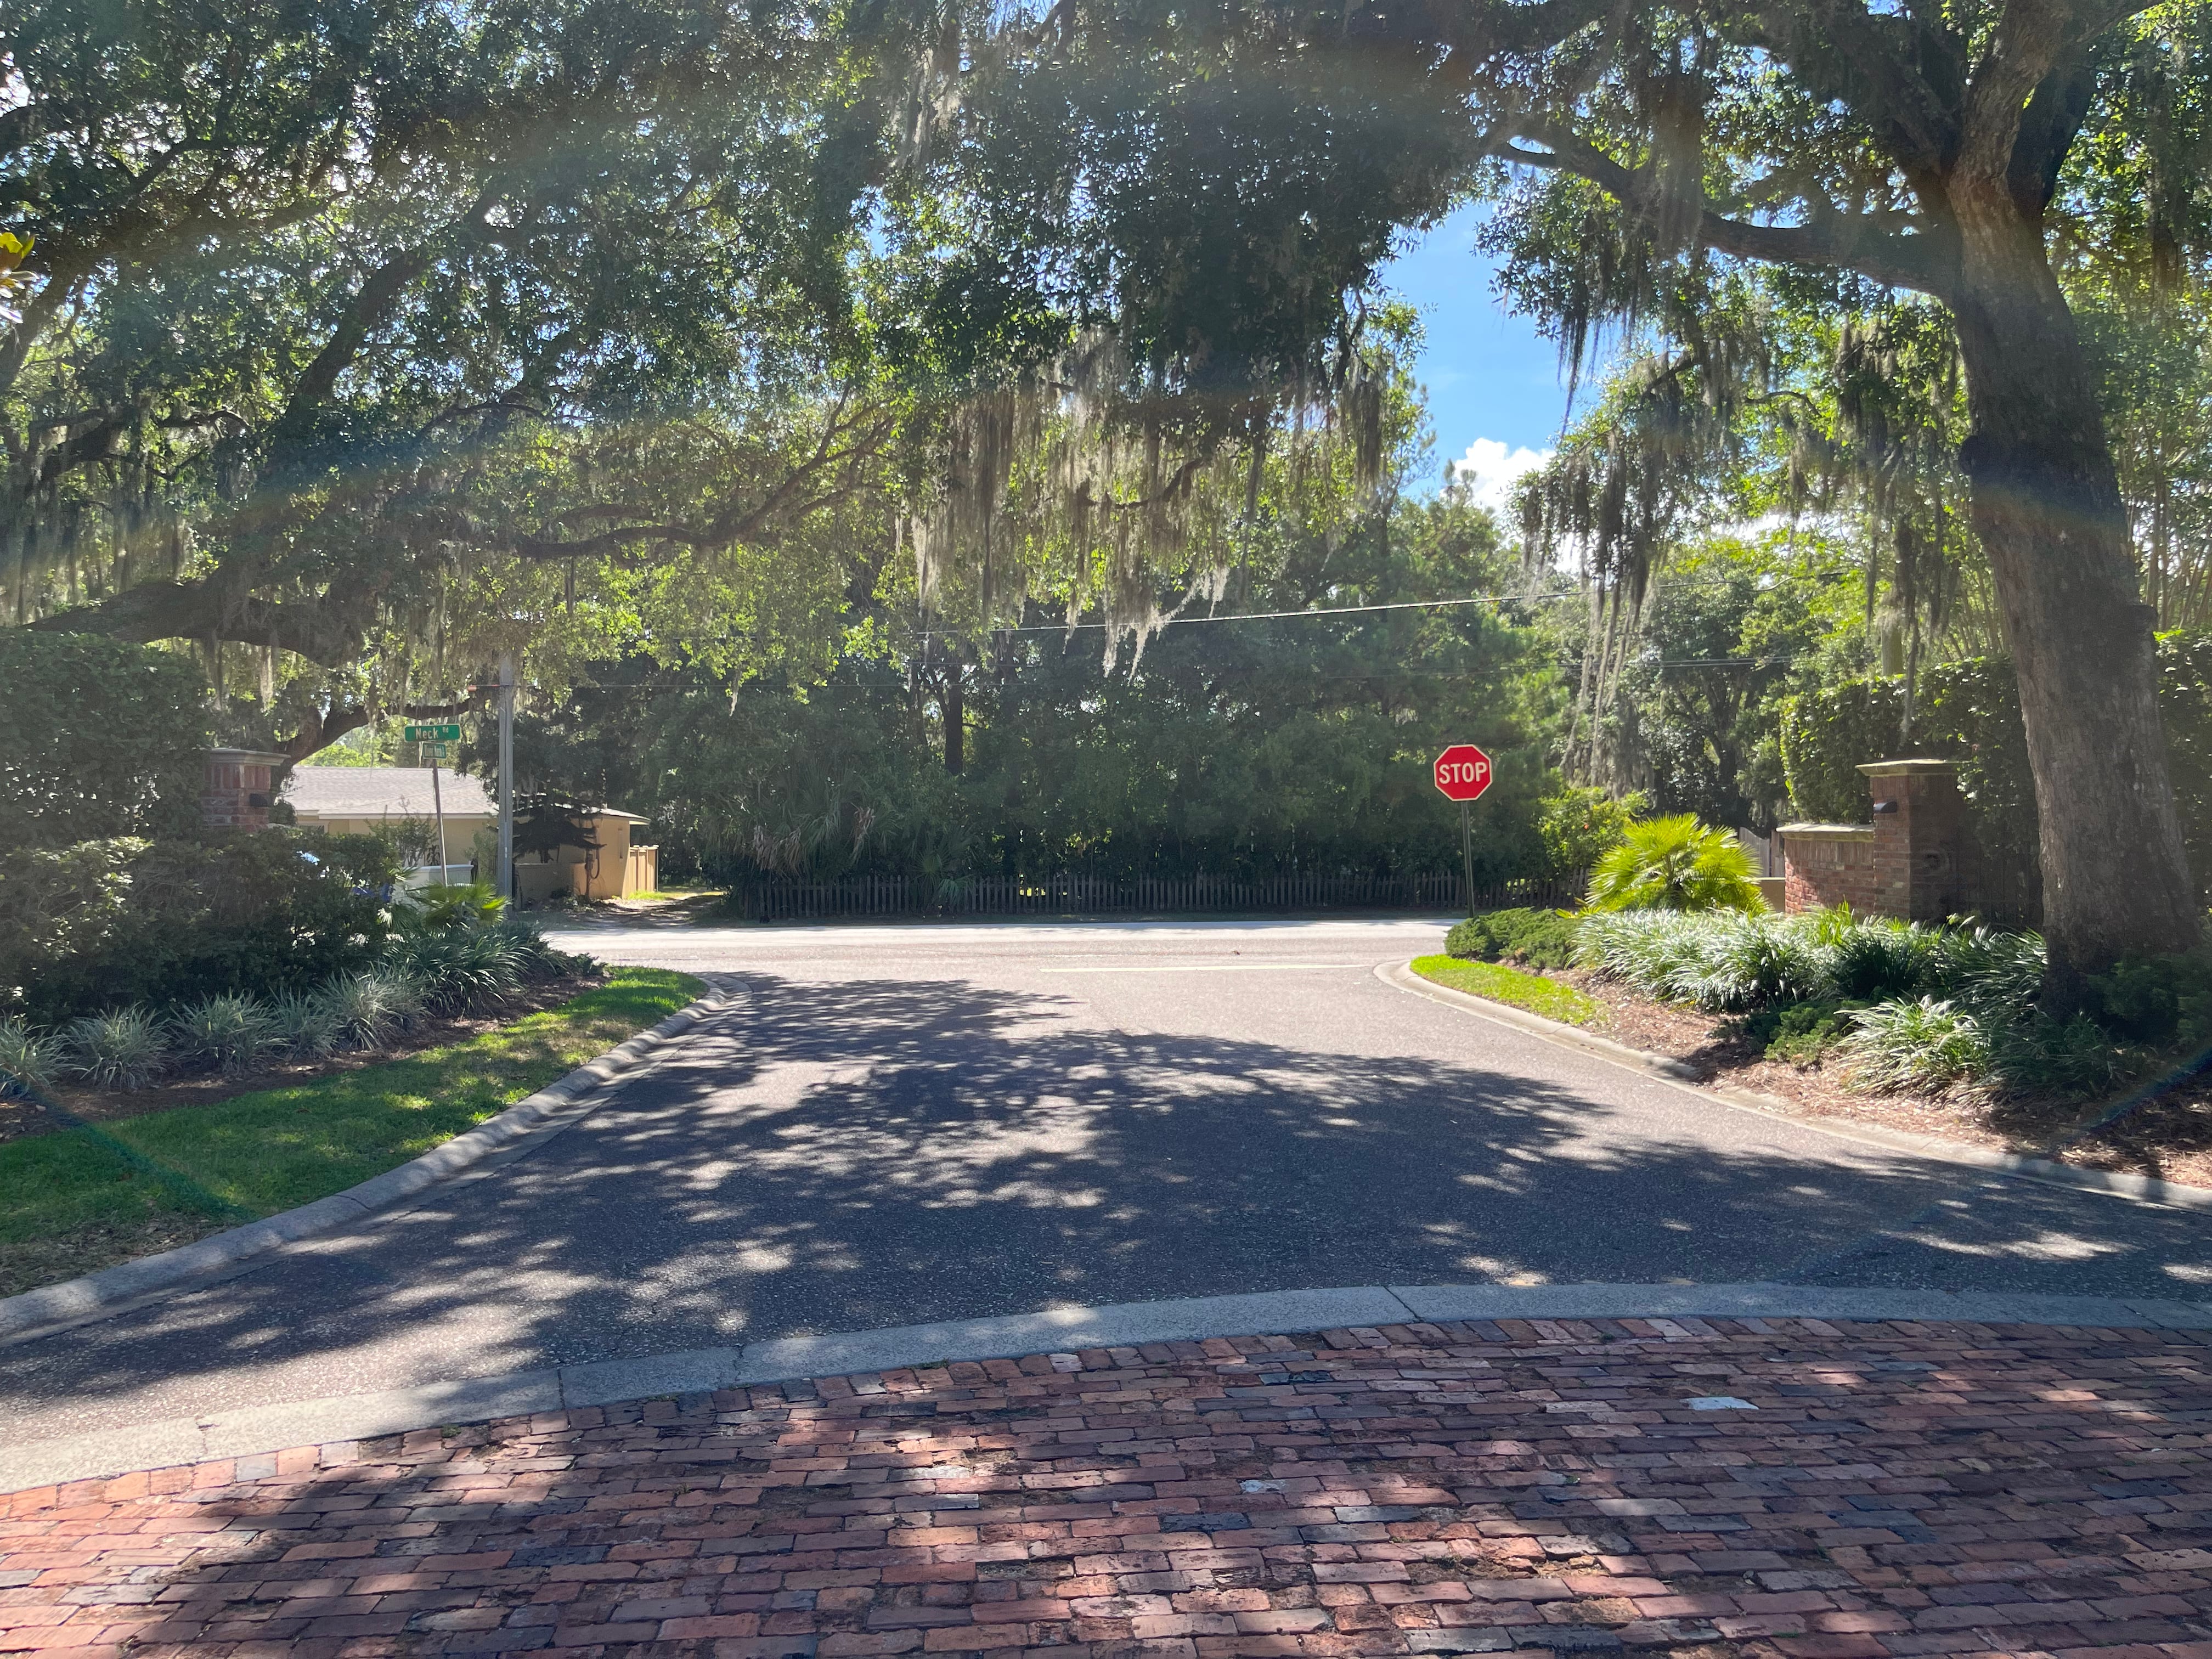 Entrance to a gated community in St. Johns County, Florida